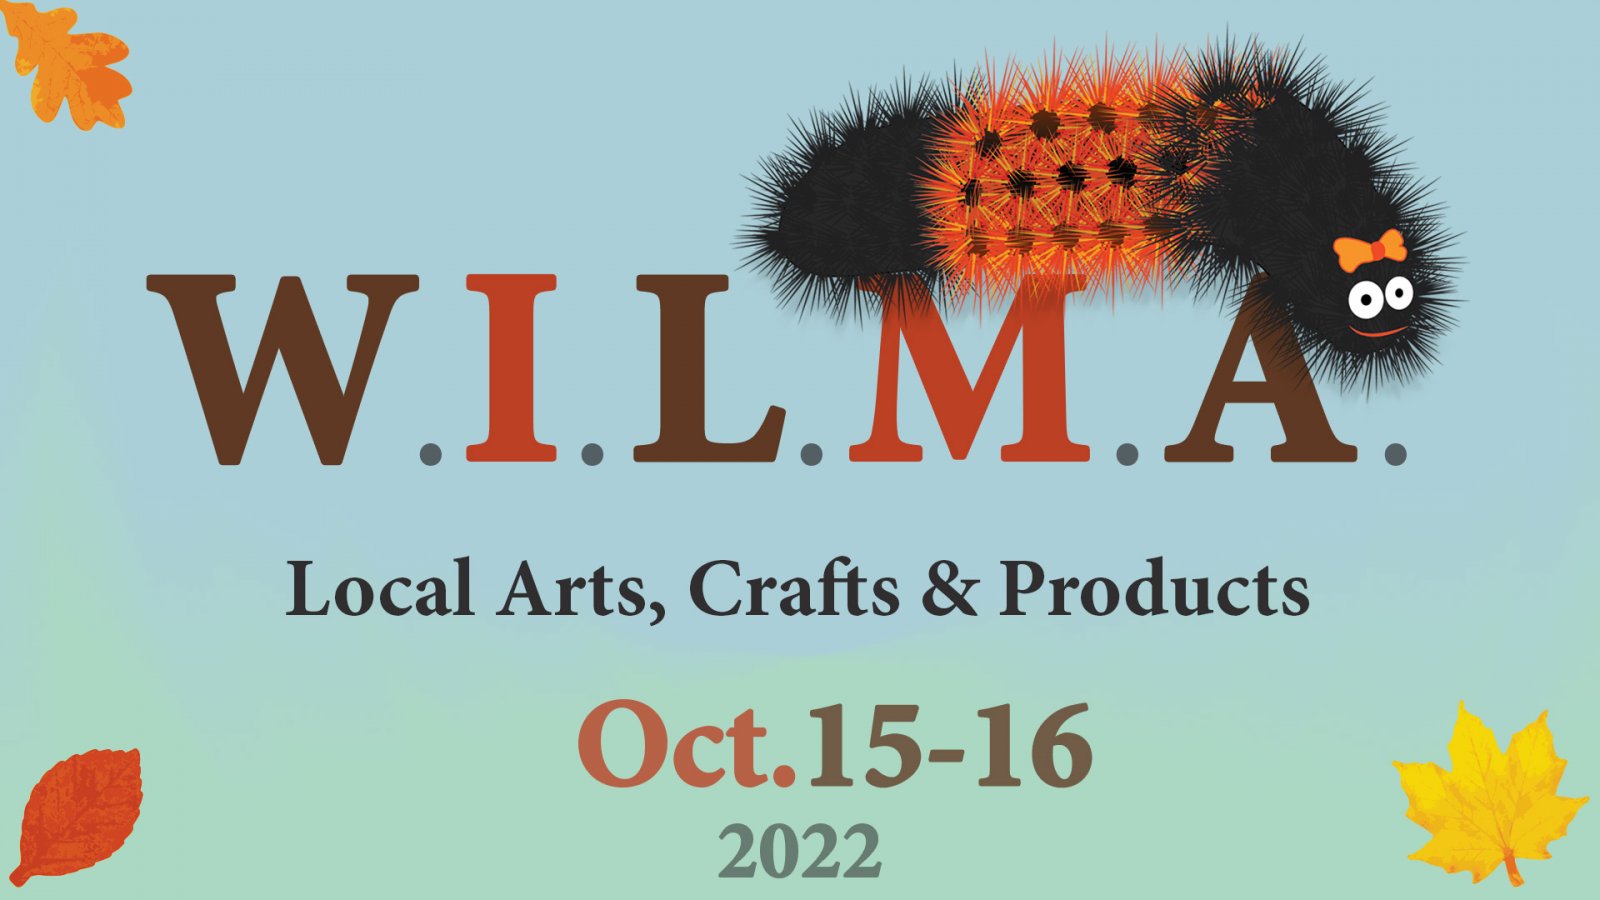 W.I.L.M.A. Local arts, crafts and products event from October 15-16, 2022